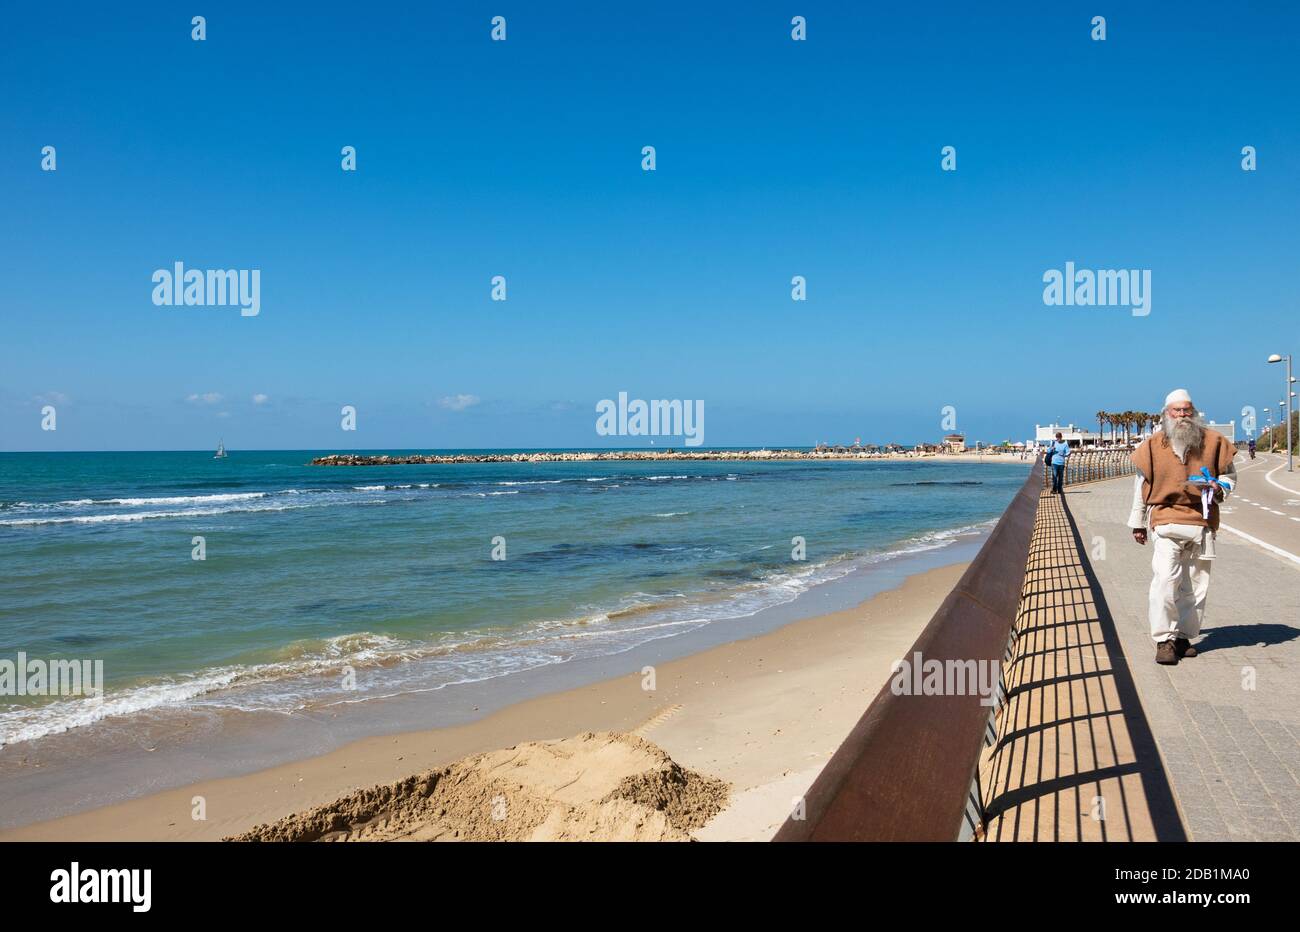 TEL AVIV, ISRAEL - MARCH 6, 2019: Senior man walking along beach promenade at Tel-Aviv in sunny day. For aged persons, walking offers numerous heart h Stock Photo